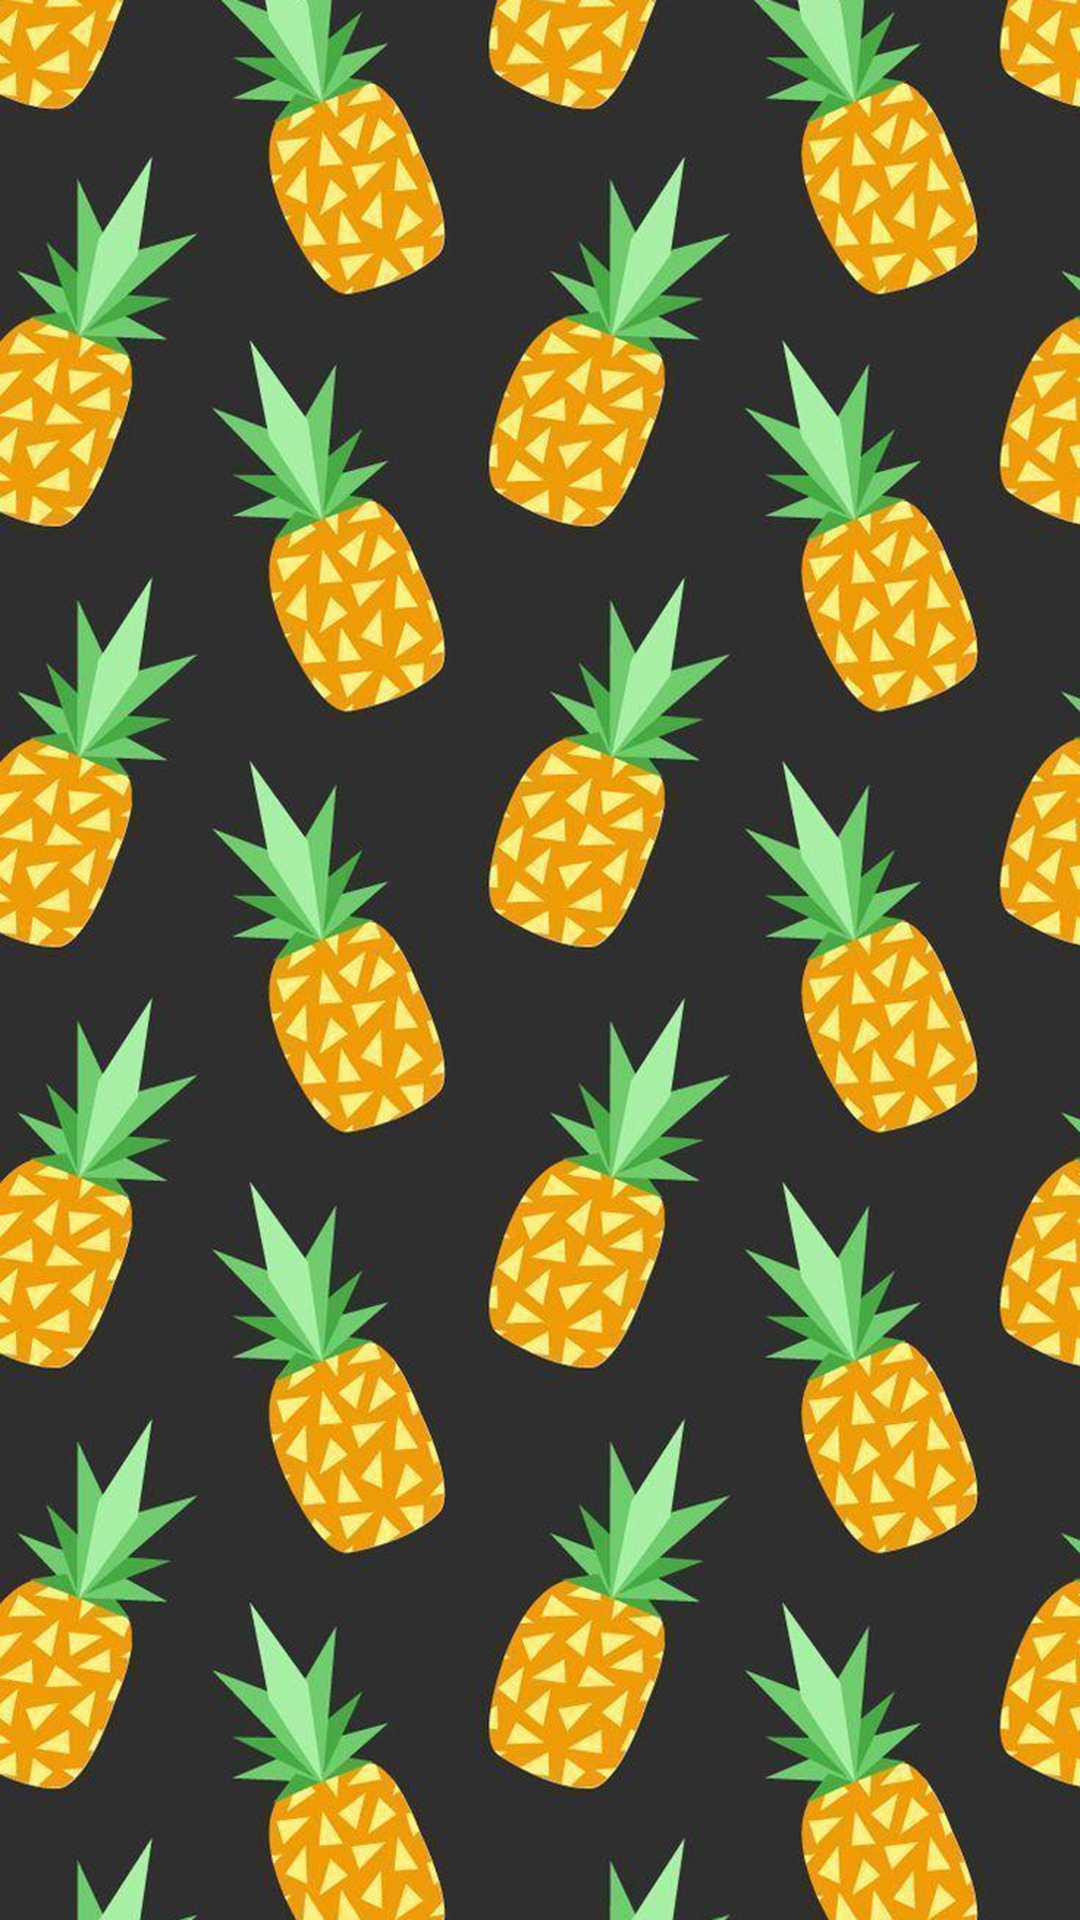 Cute Pineapple Fabric Wallpaper and Home Decor  Spoonflower